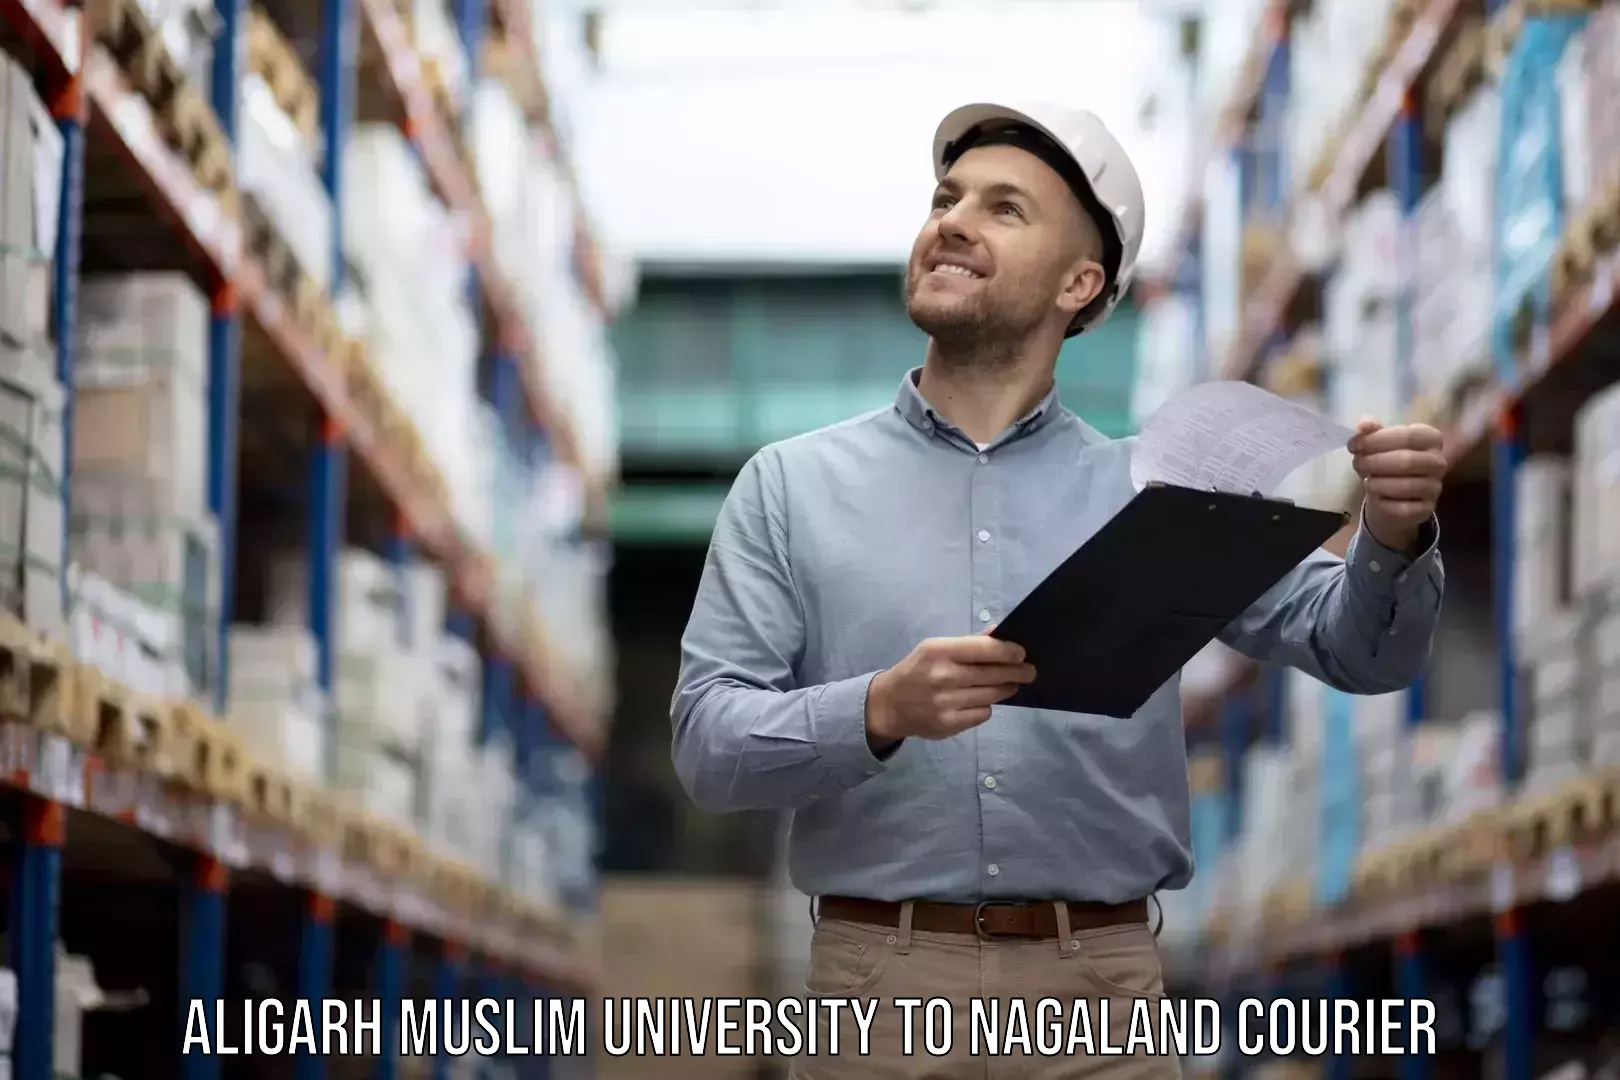 Specialized moving company in Aligarh Muslim University to Mon